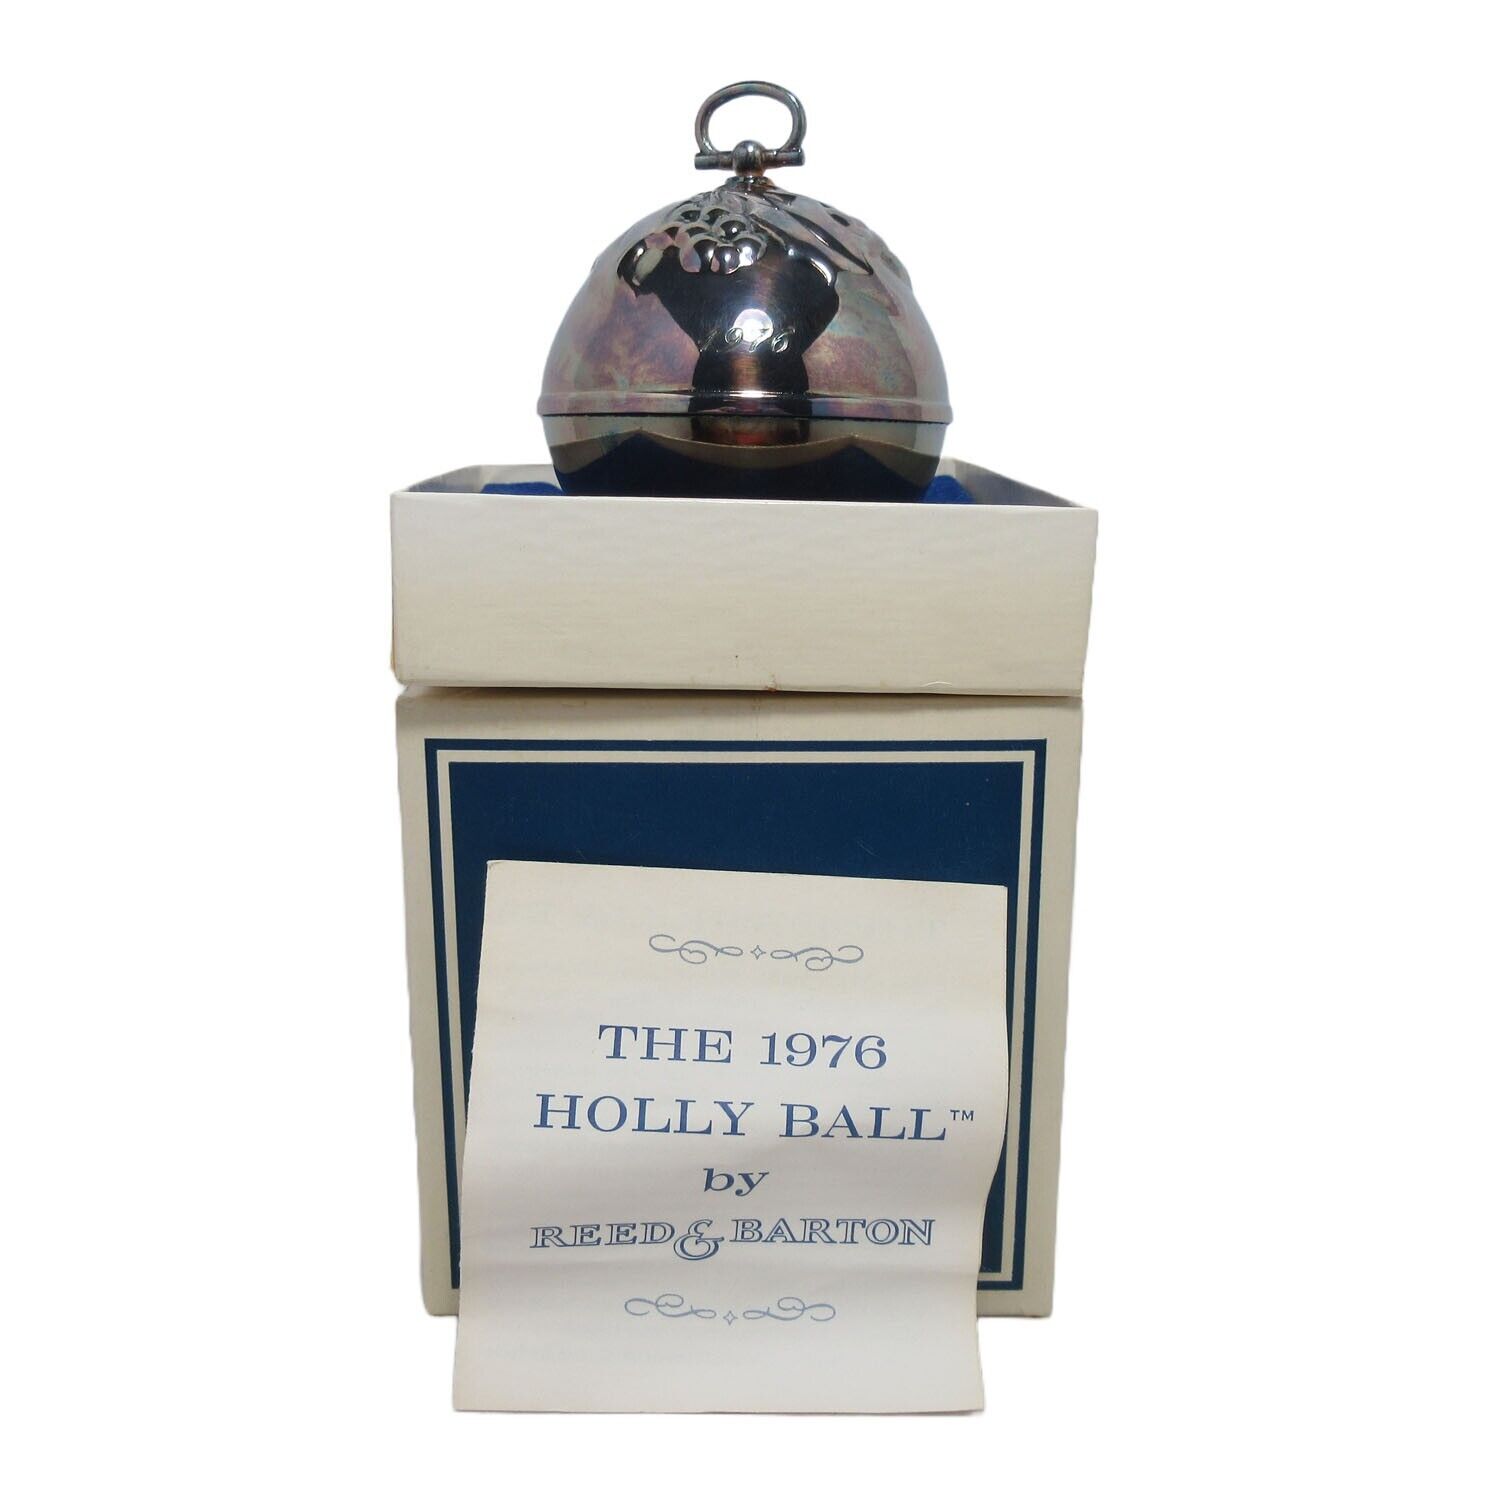 The 1976 Holly Ball by Reed & Barton Silver Plated Christmas Ornament 1st Ed.